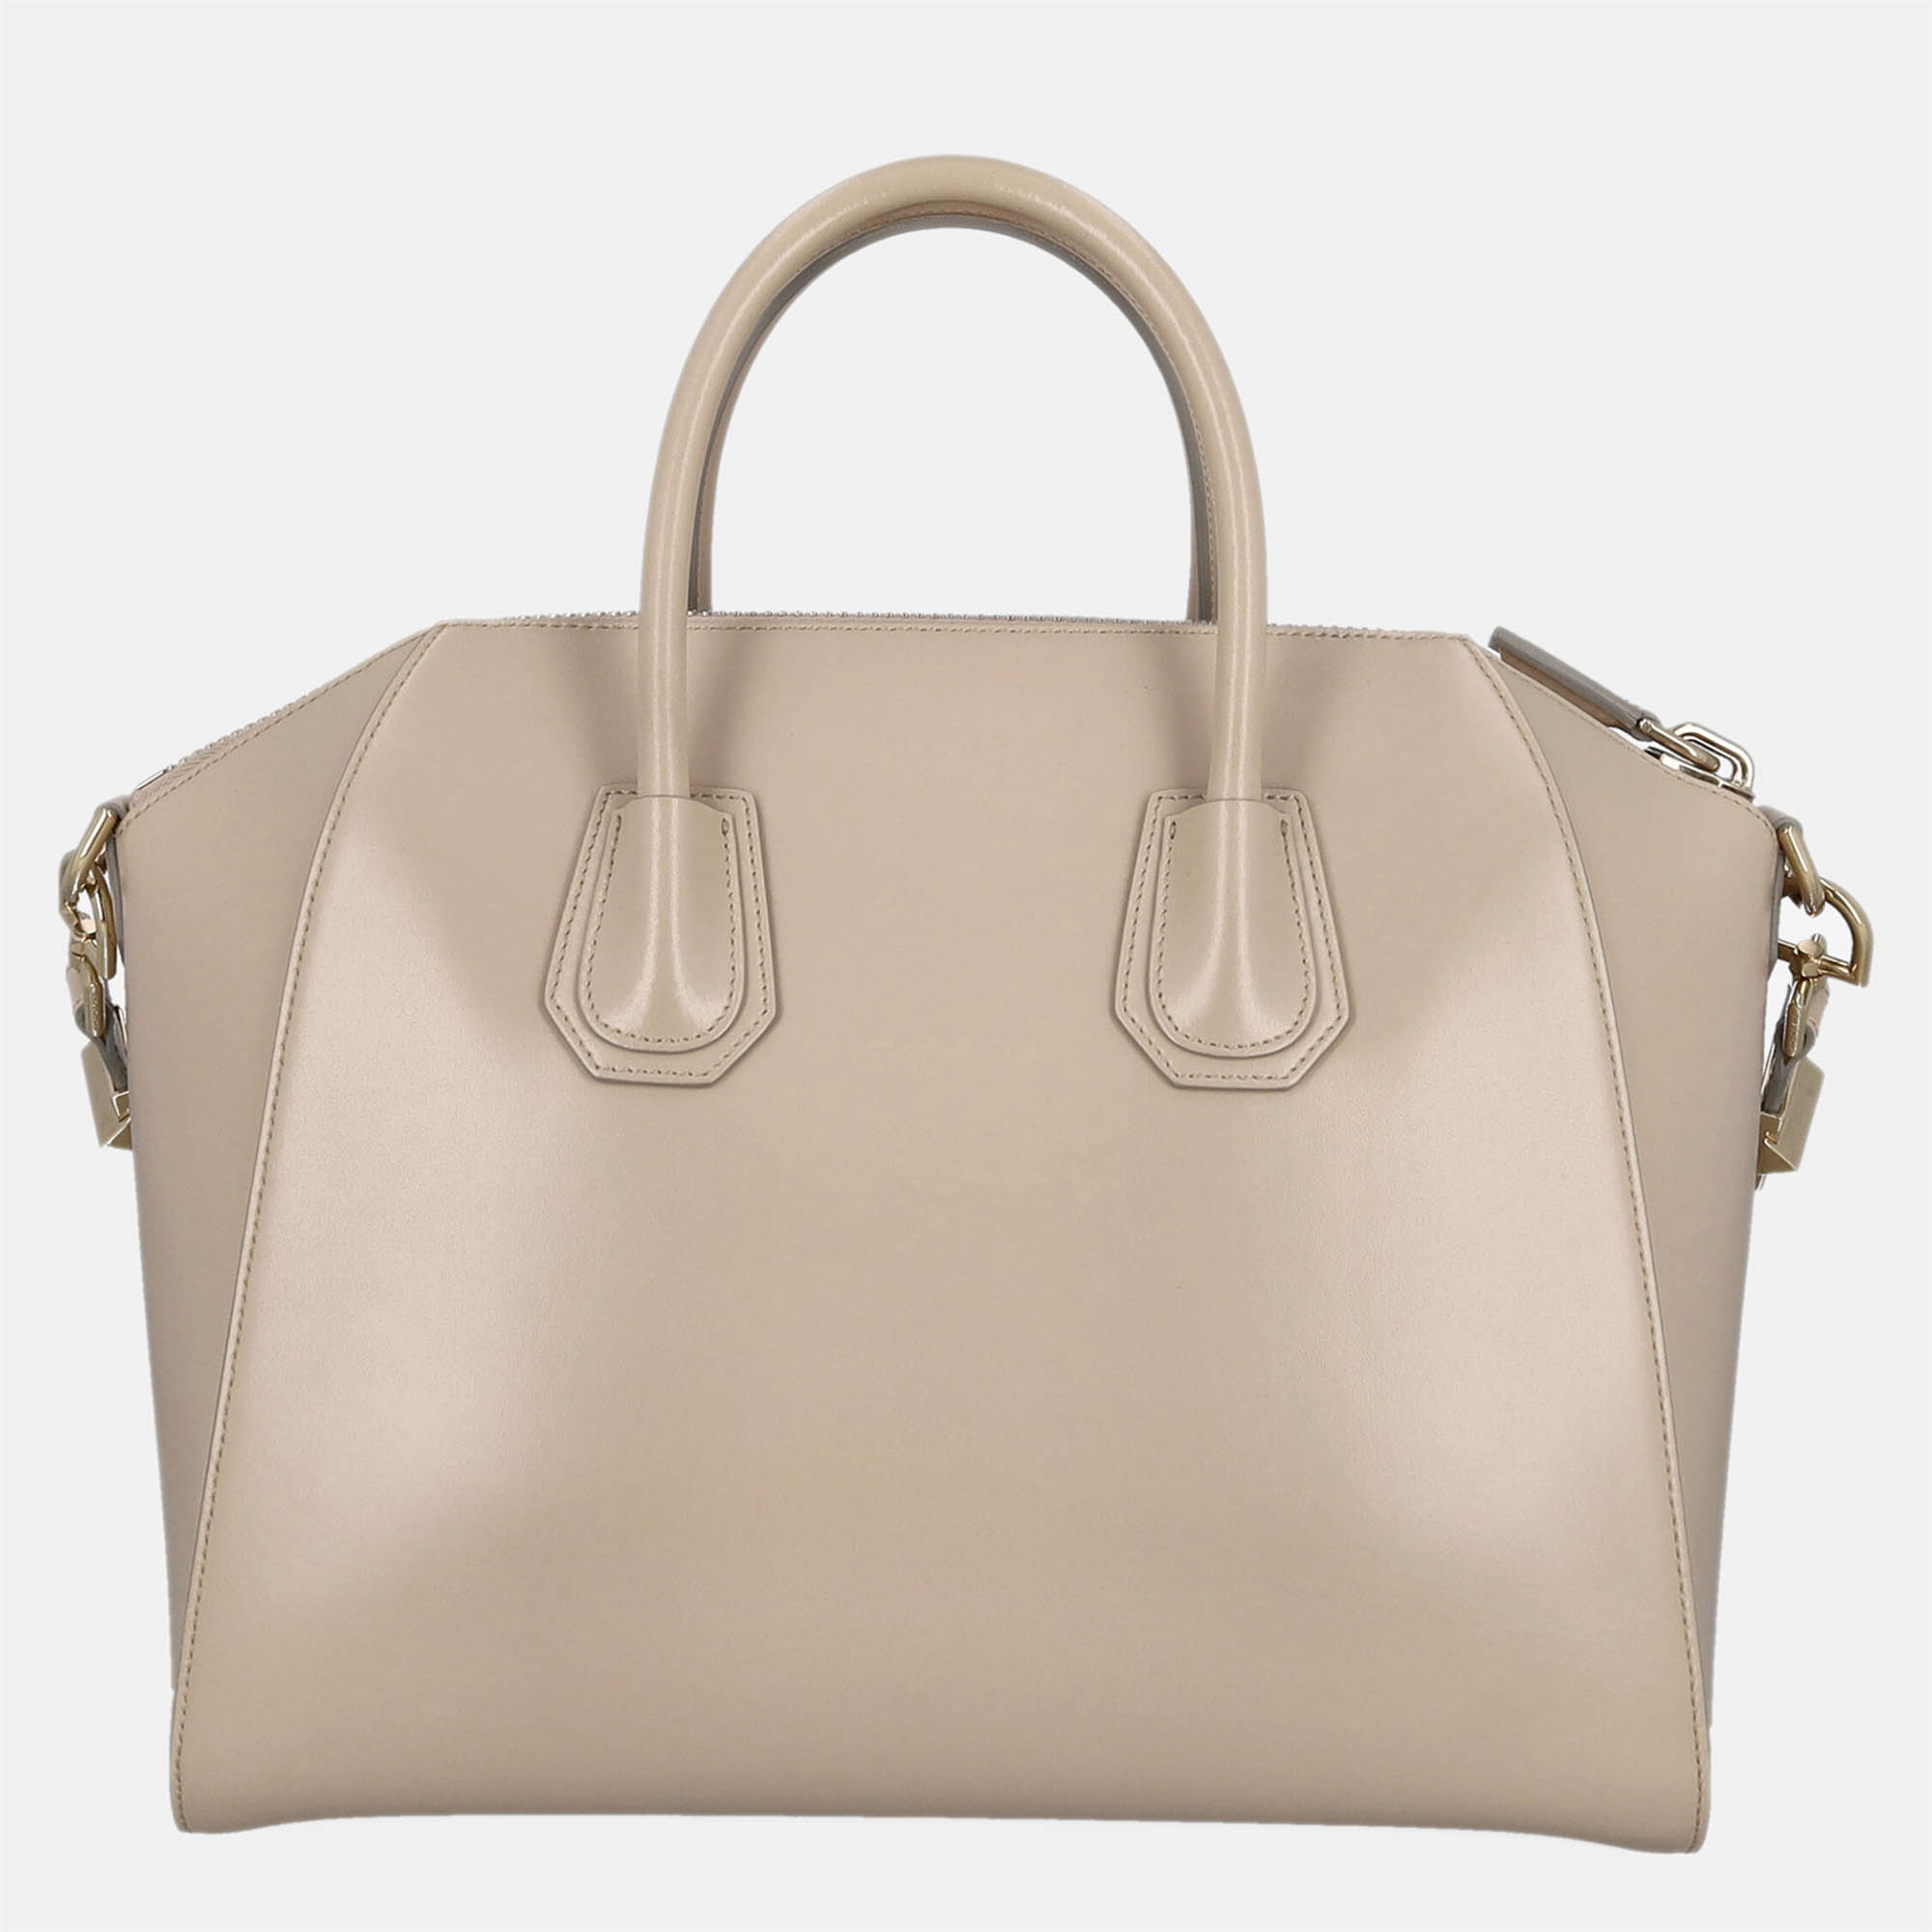 Givenchy  Women's Leather Tote Bag - Beige - One Size